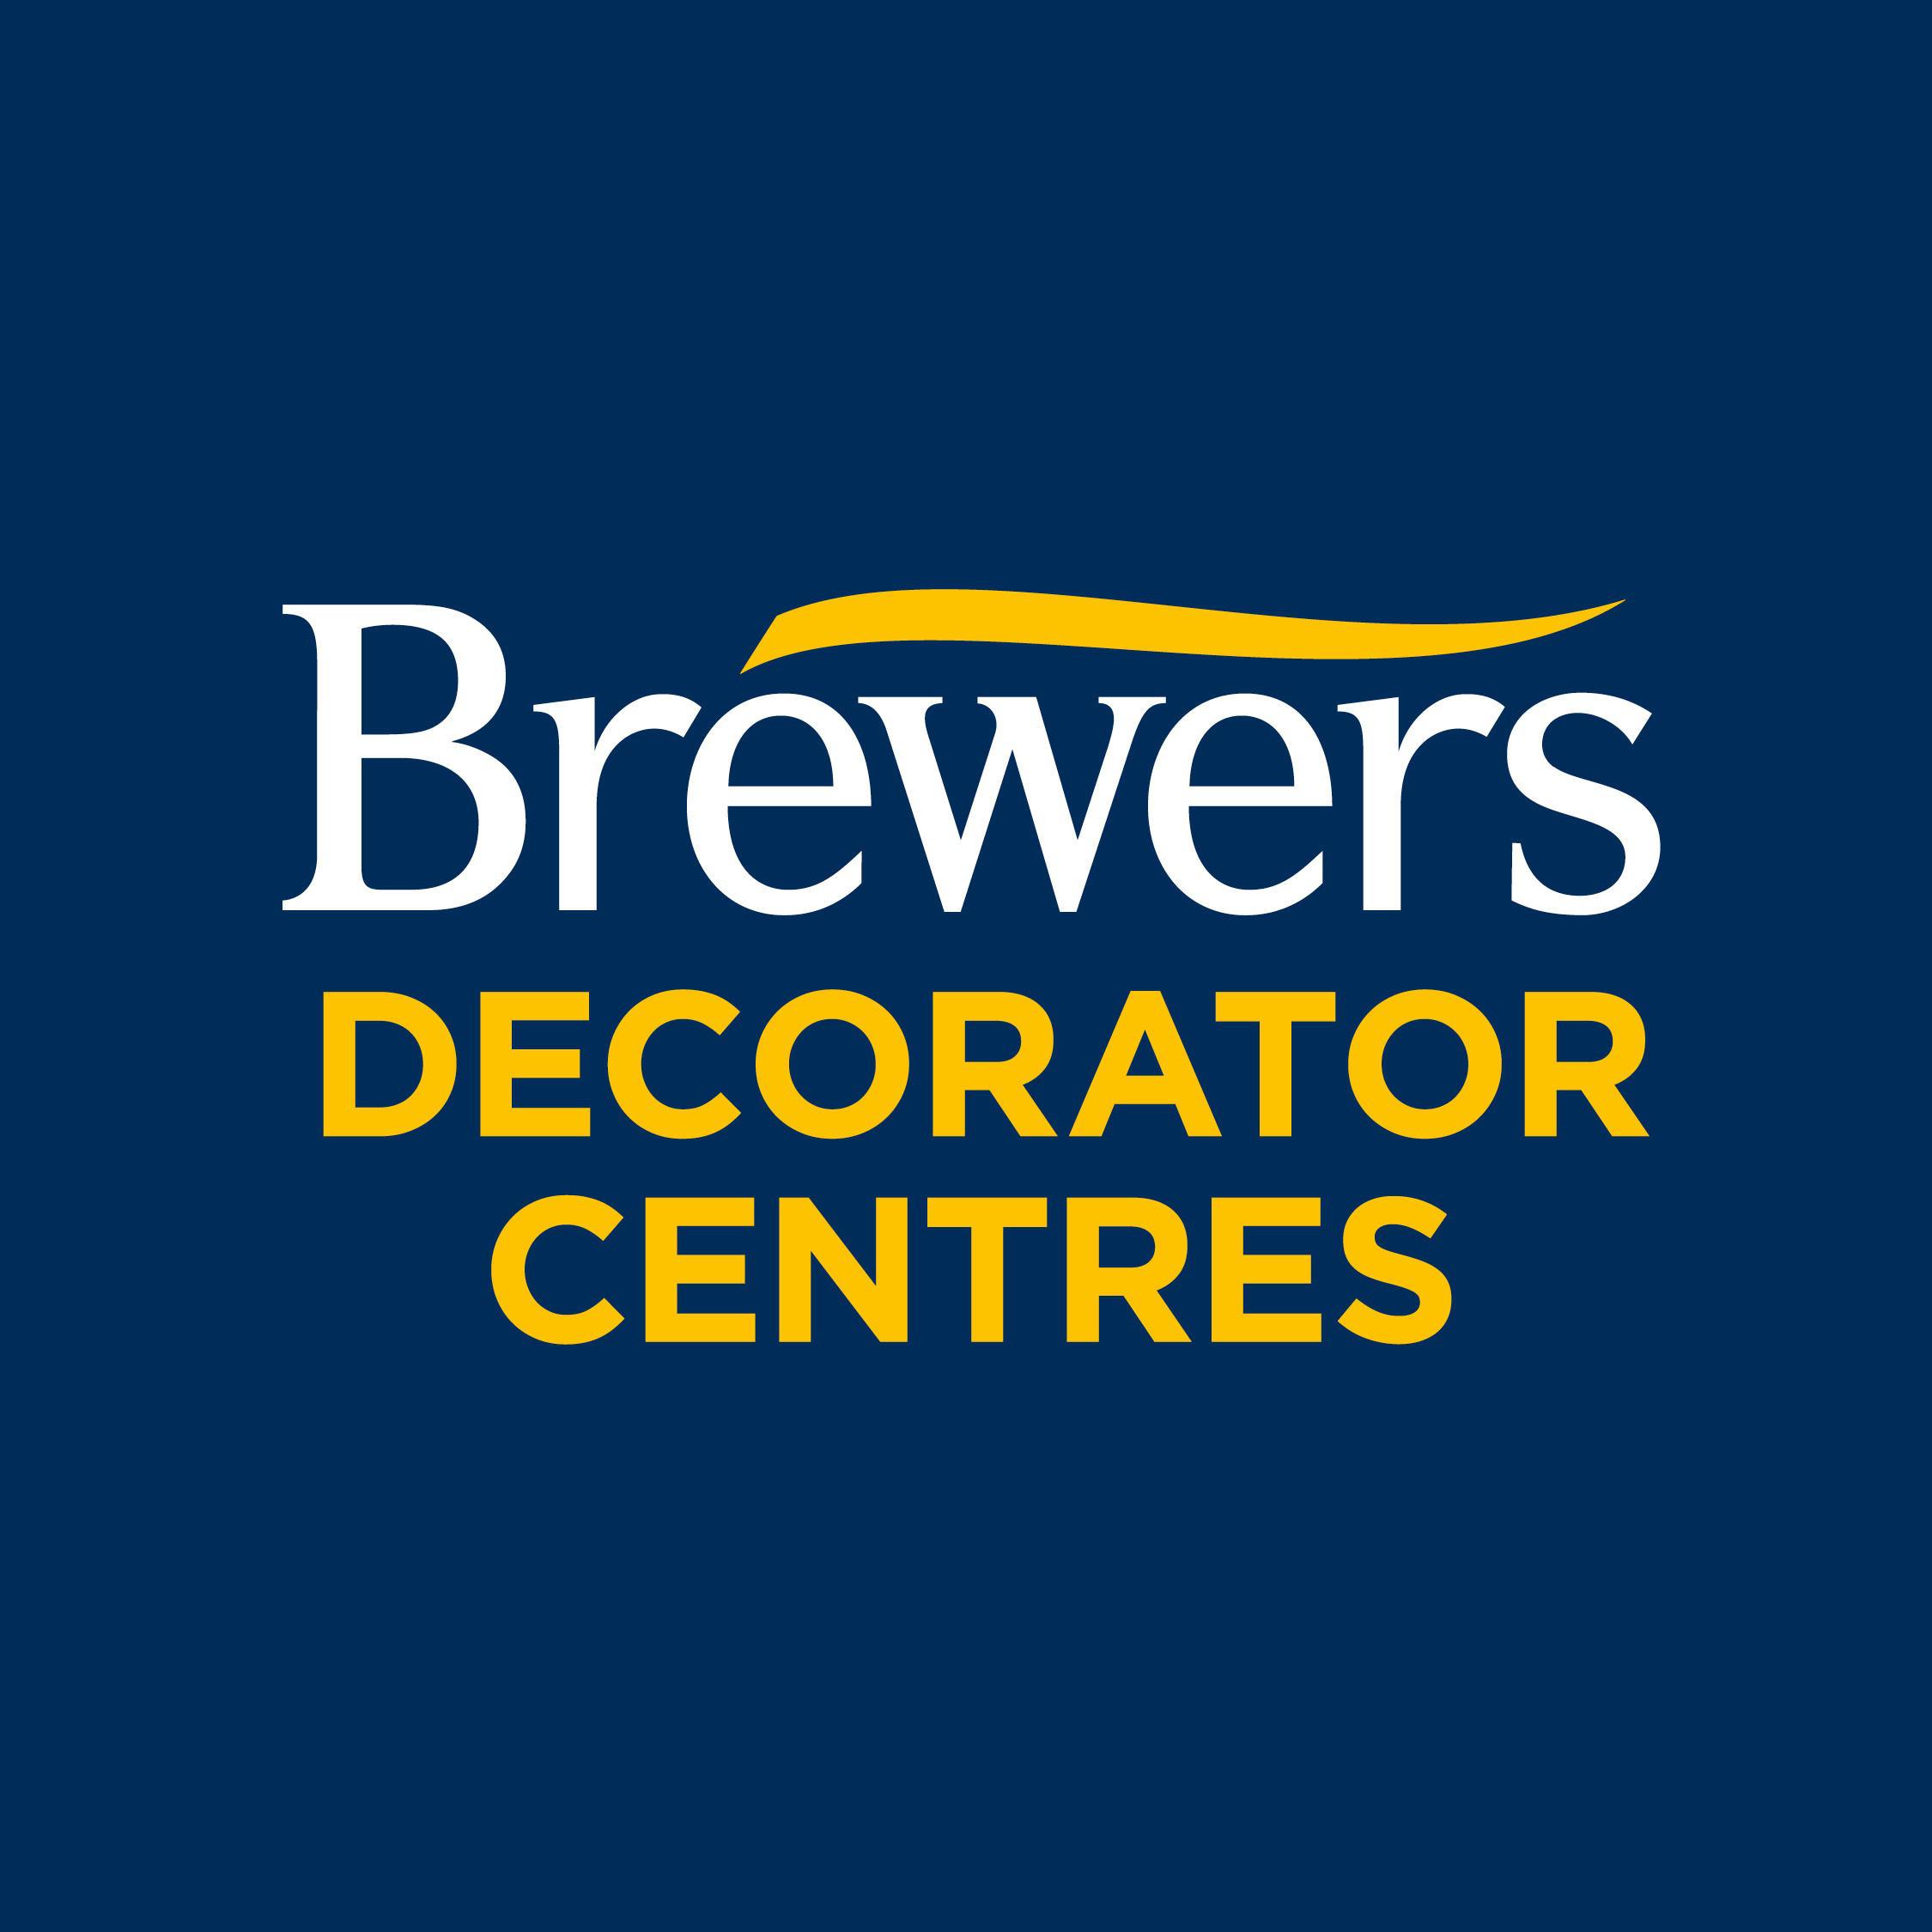 Brewers Decorator Centres - Frinton-on-Sea, Essex CO13 9AH - 01255 673888 | ShowMeLocal.com